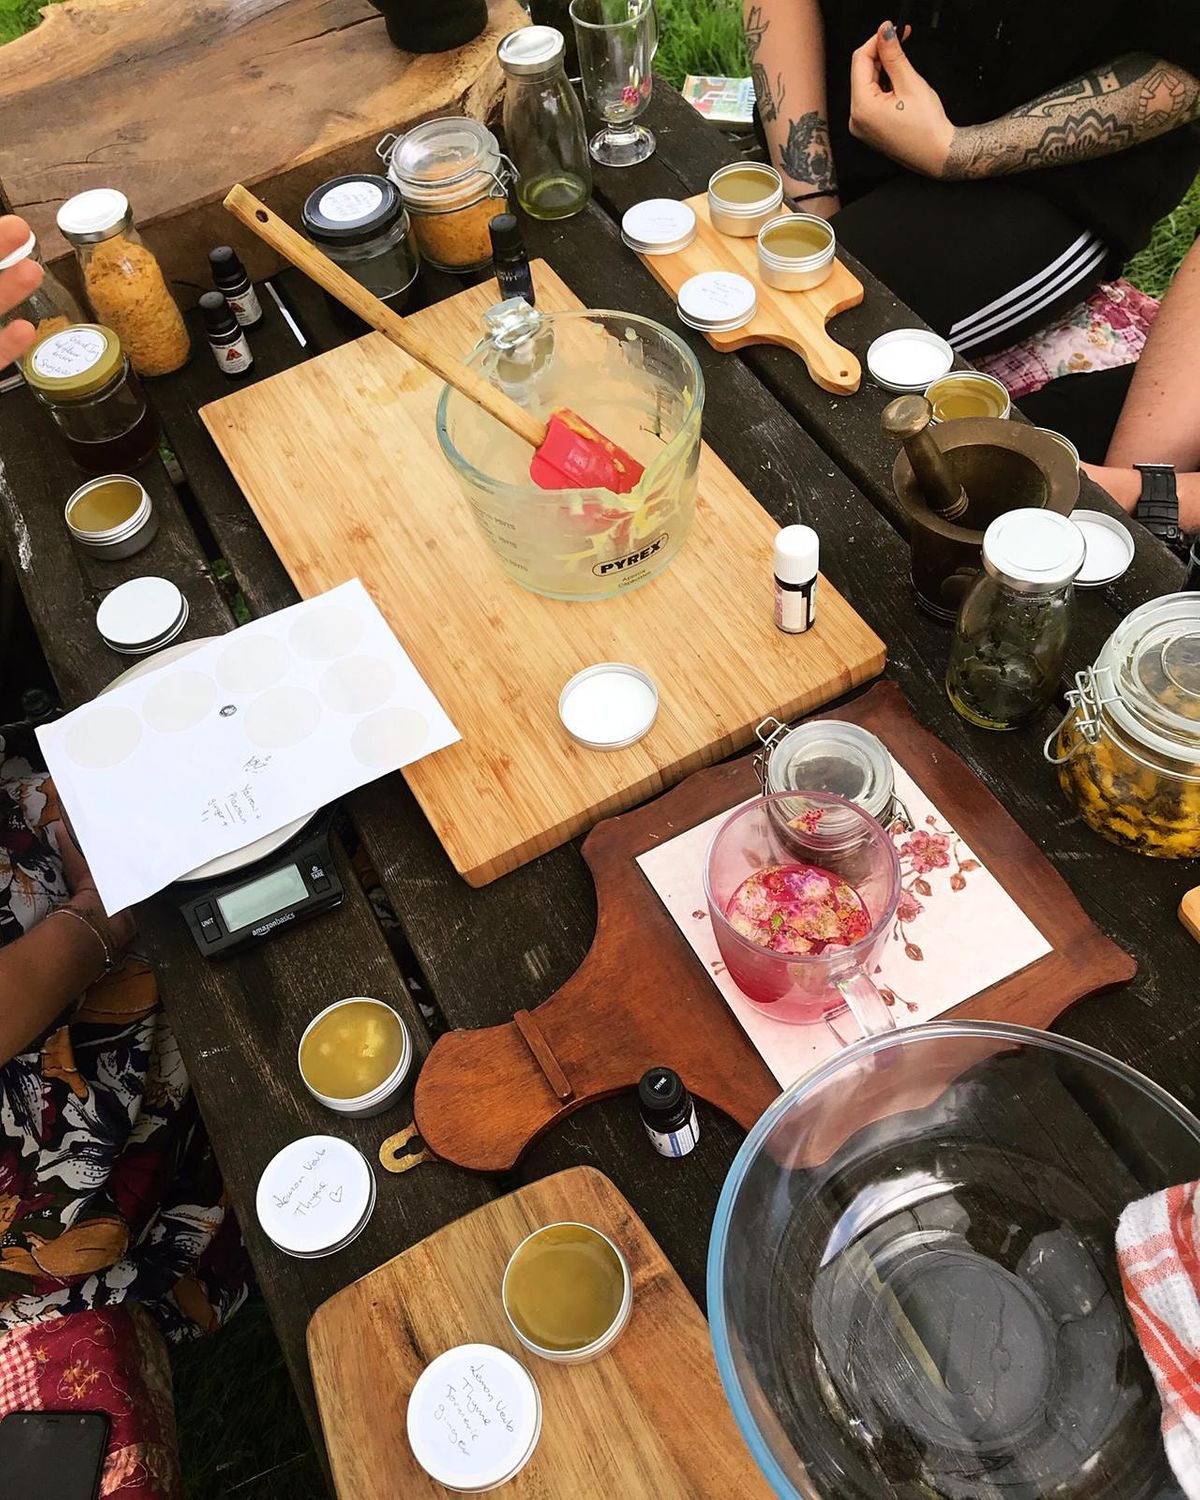 Winter Infused Oils and Balms Workshop - all materials included